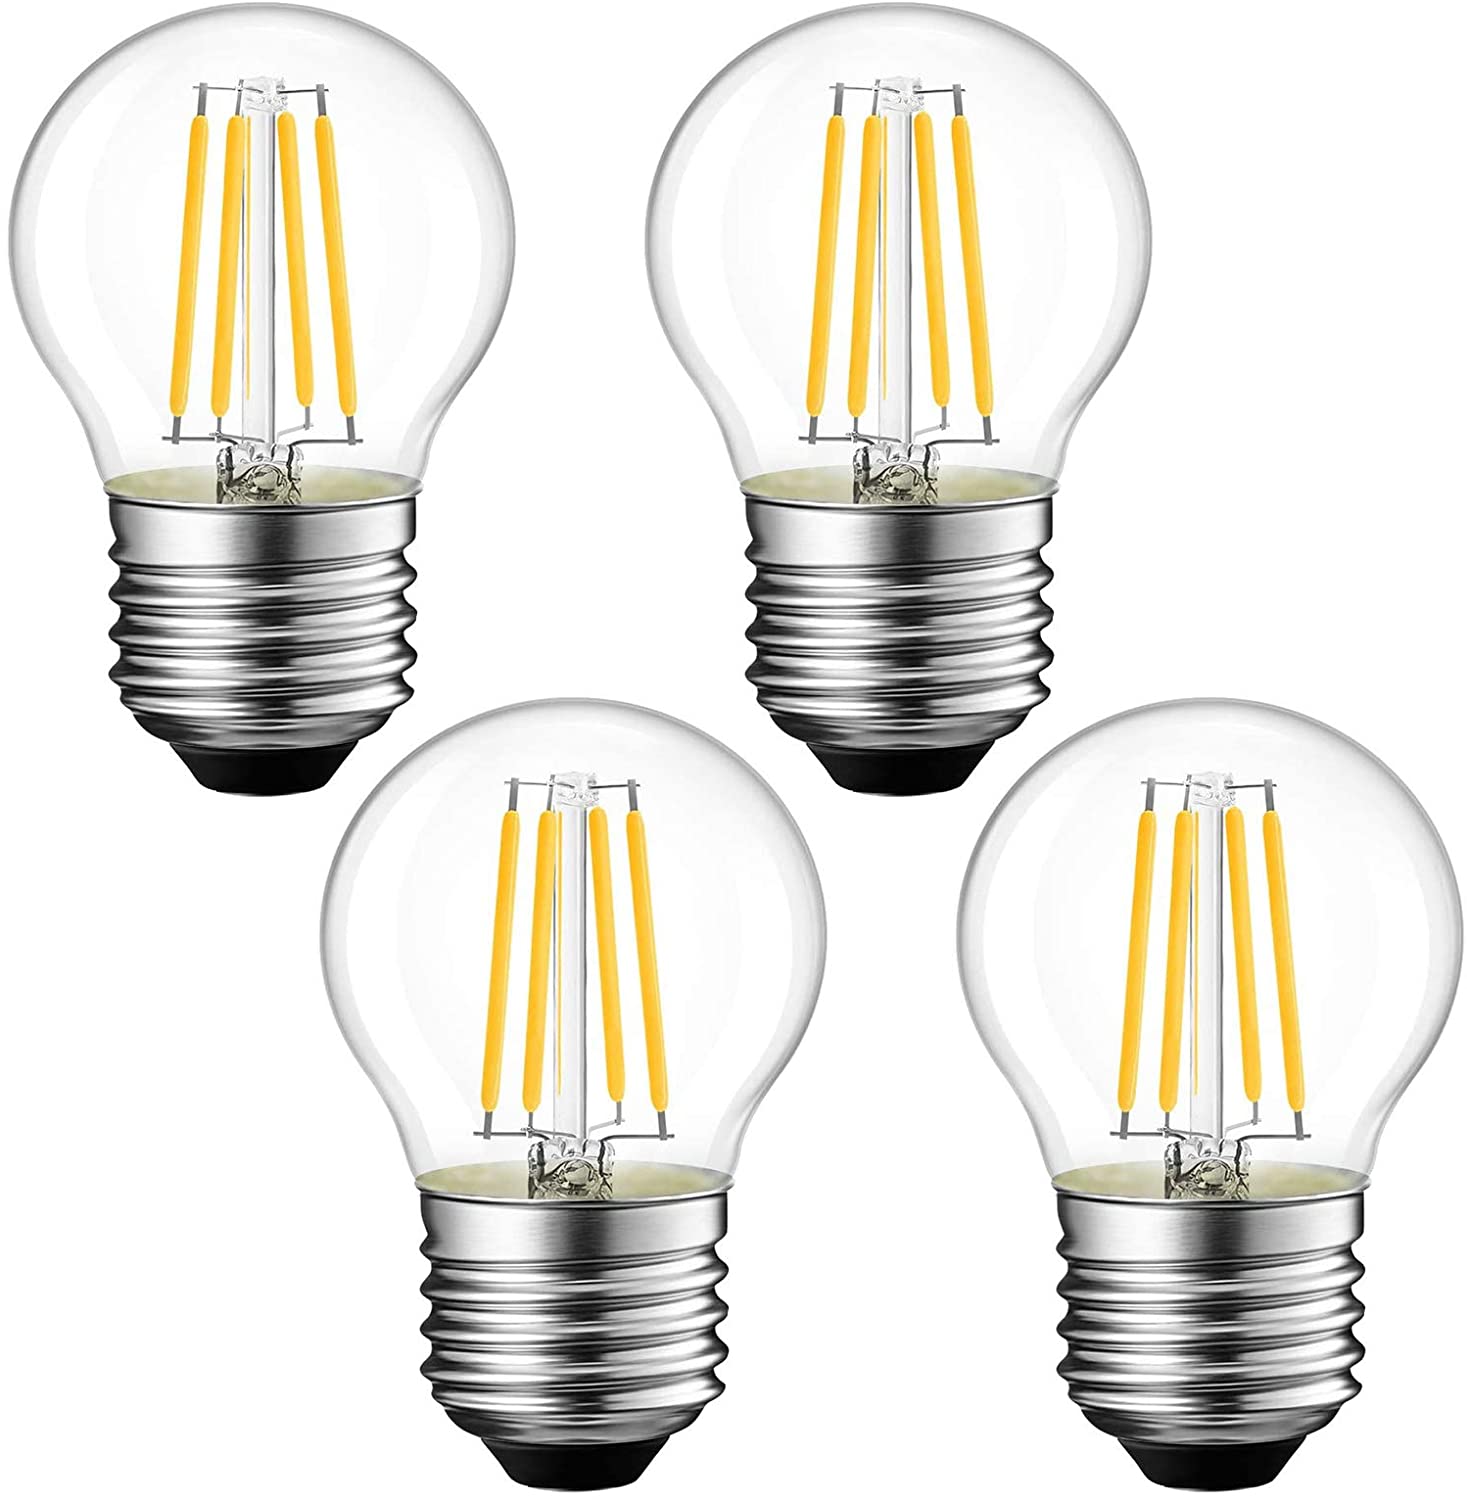 Manufacturer for A19 Led Light Bulbs - G45 LED Industrial Vintage Edison Style LED Filament Light Bulb Dimmable Soft Warm – Firstech